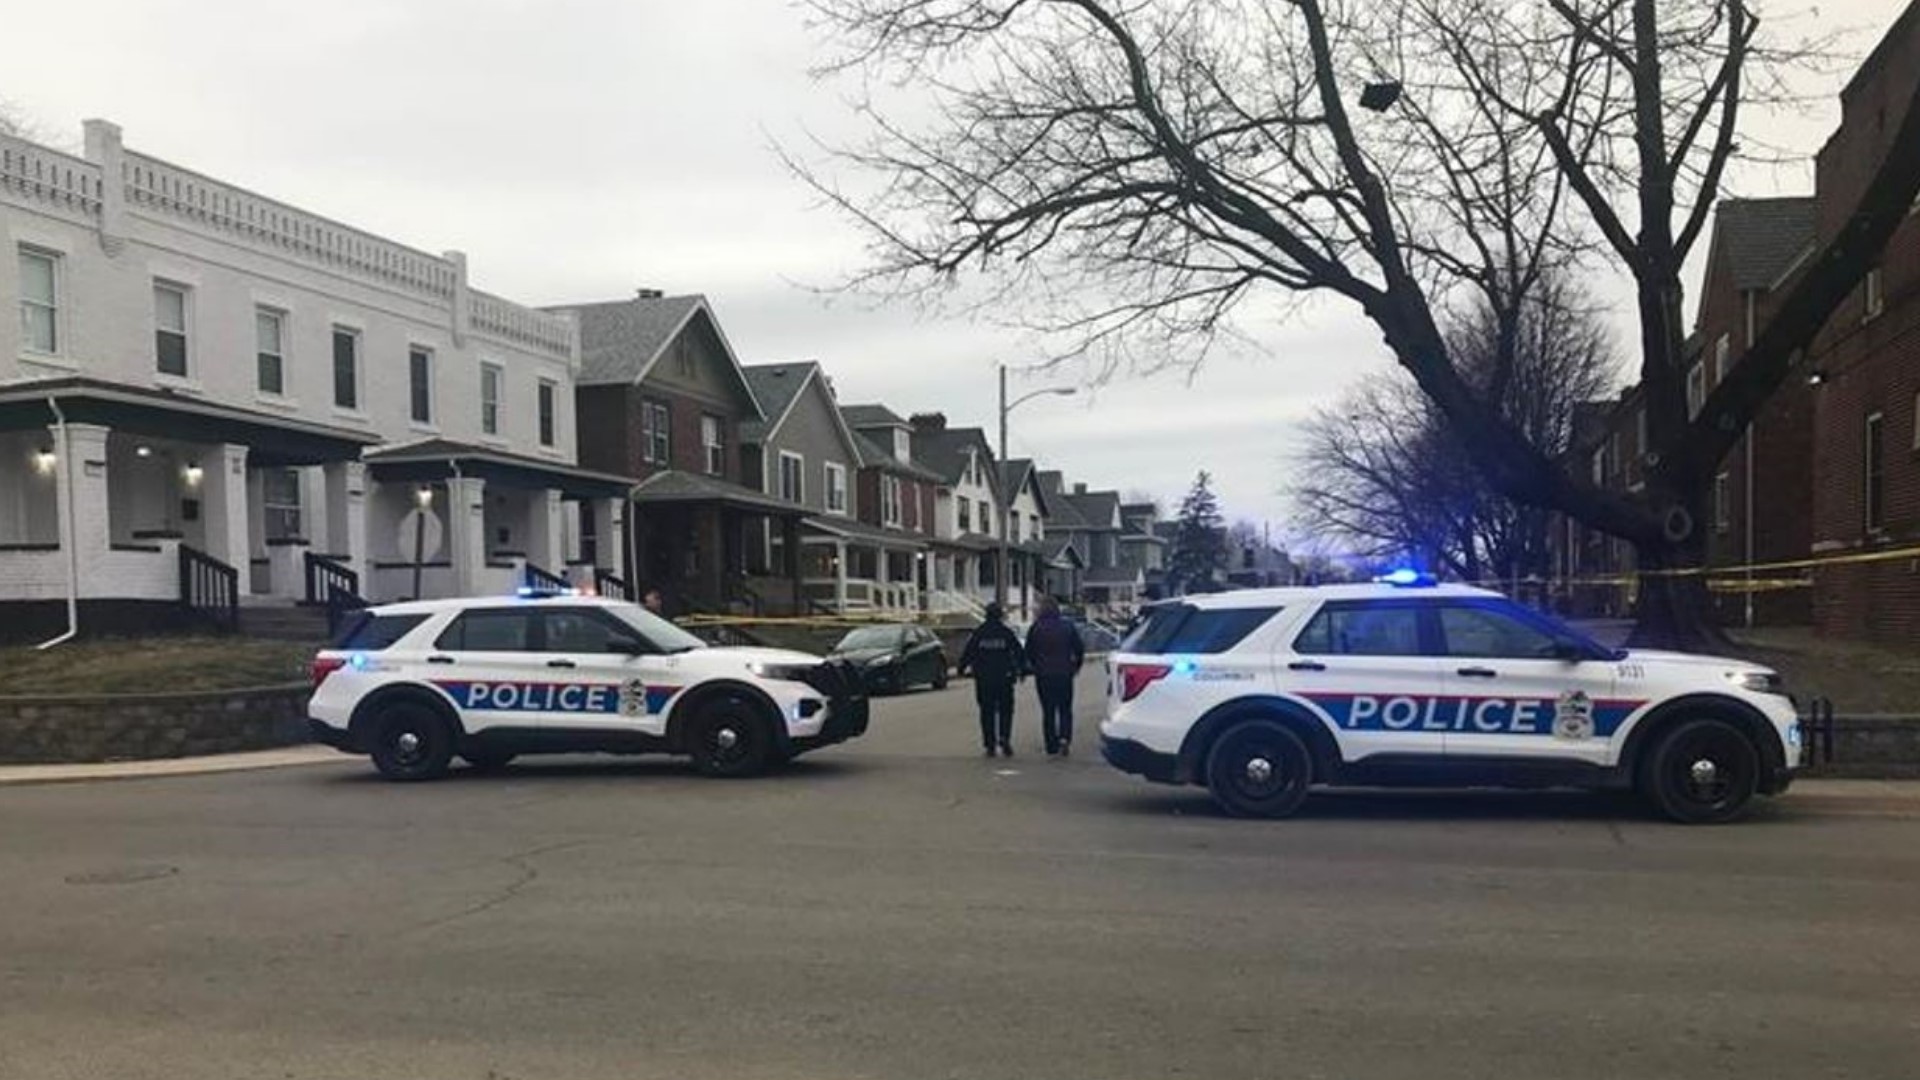 No officers were injured in the shooting, but the man who was involved was taken to the hospital, a spokesperson from Attorney General Dave Yost's office said.